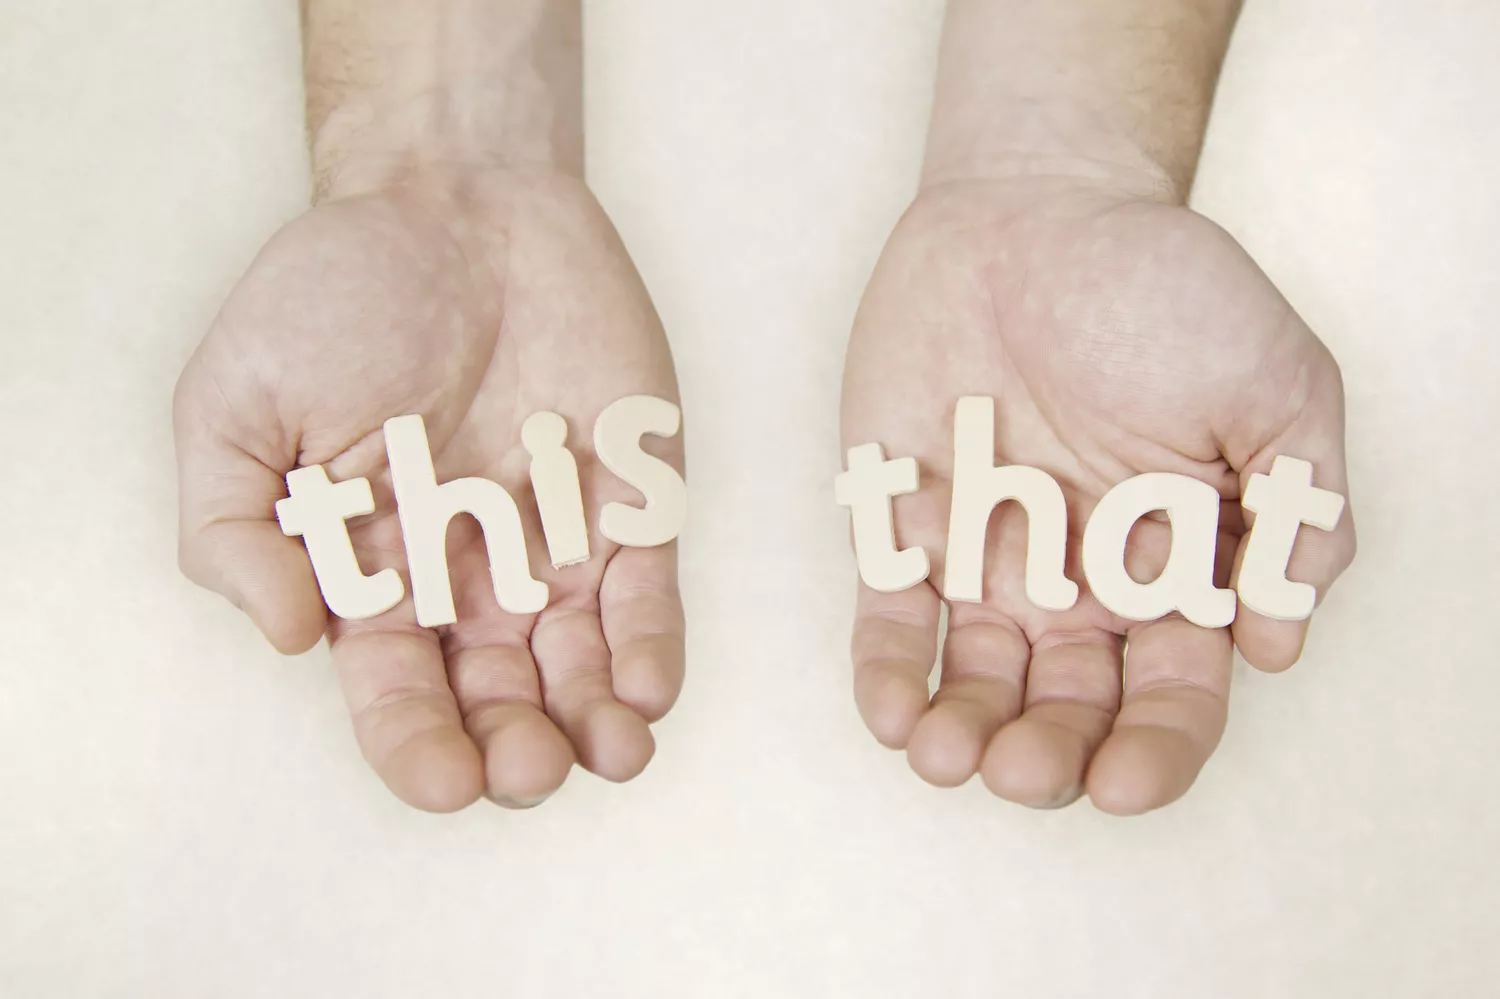 Hands holding block letters that read "this" and "that"